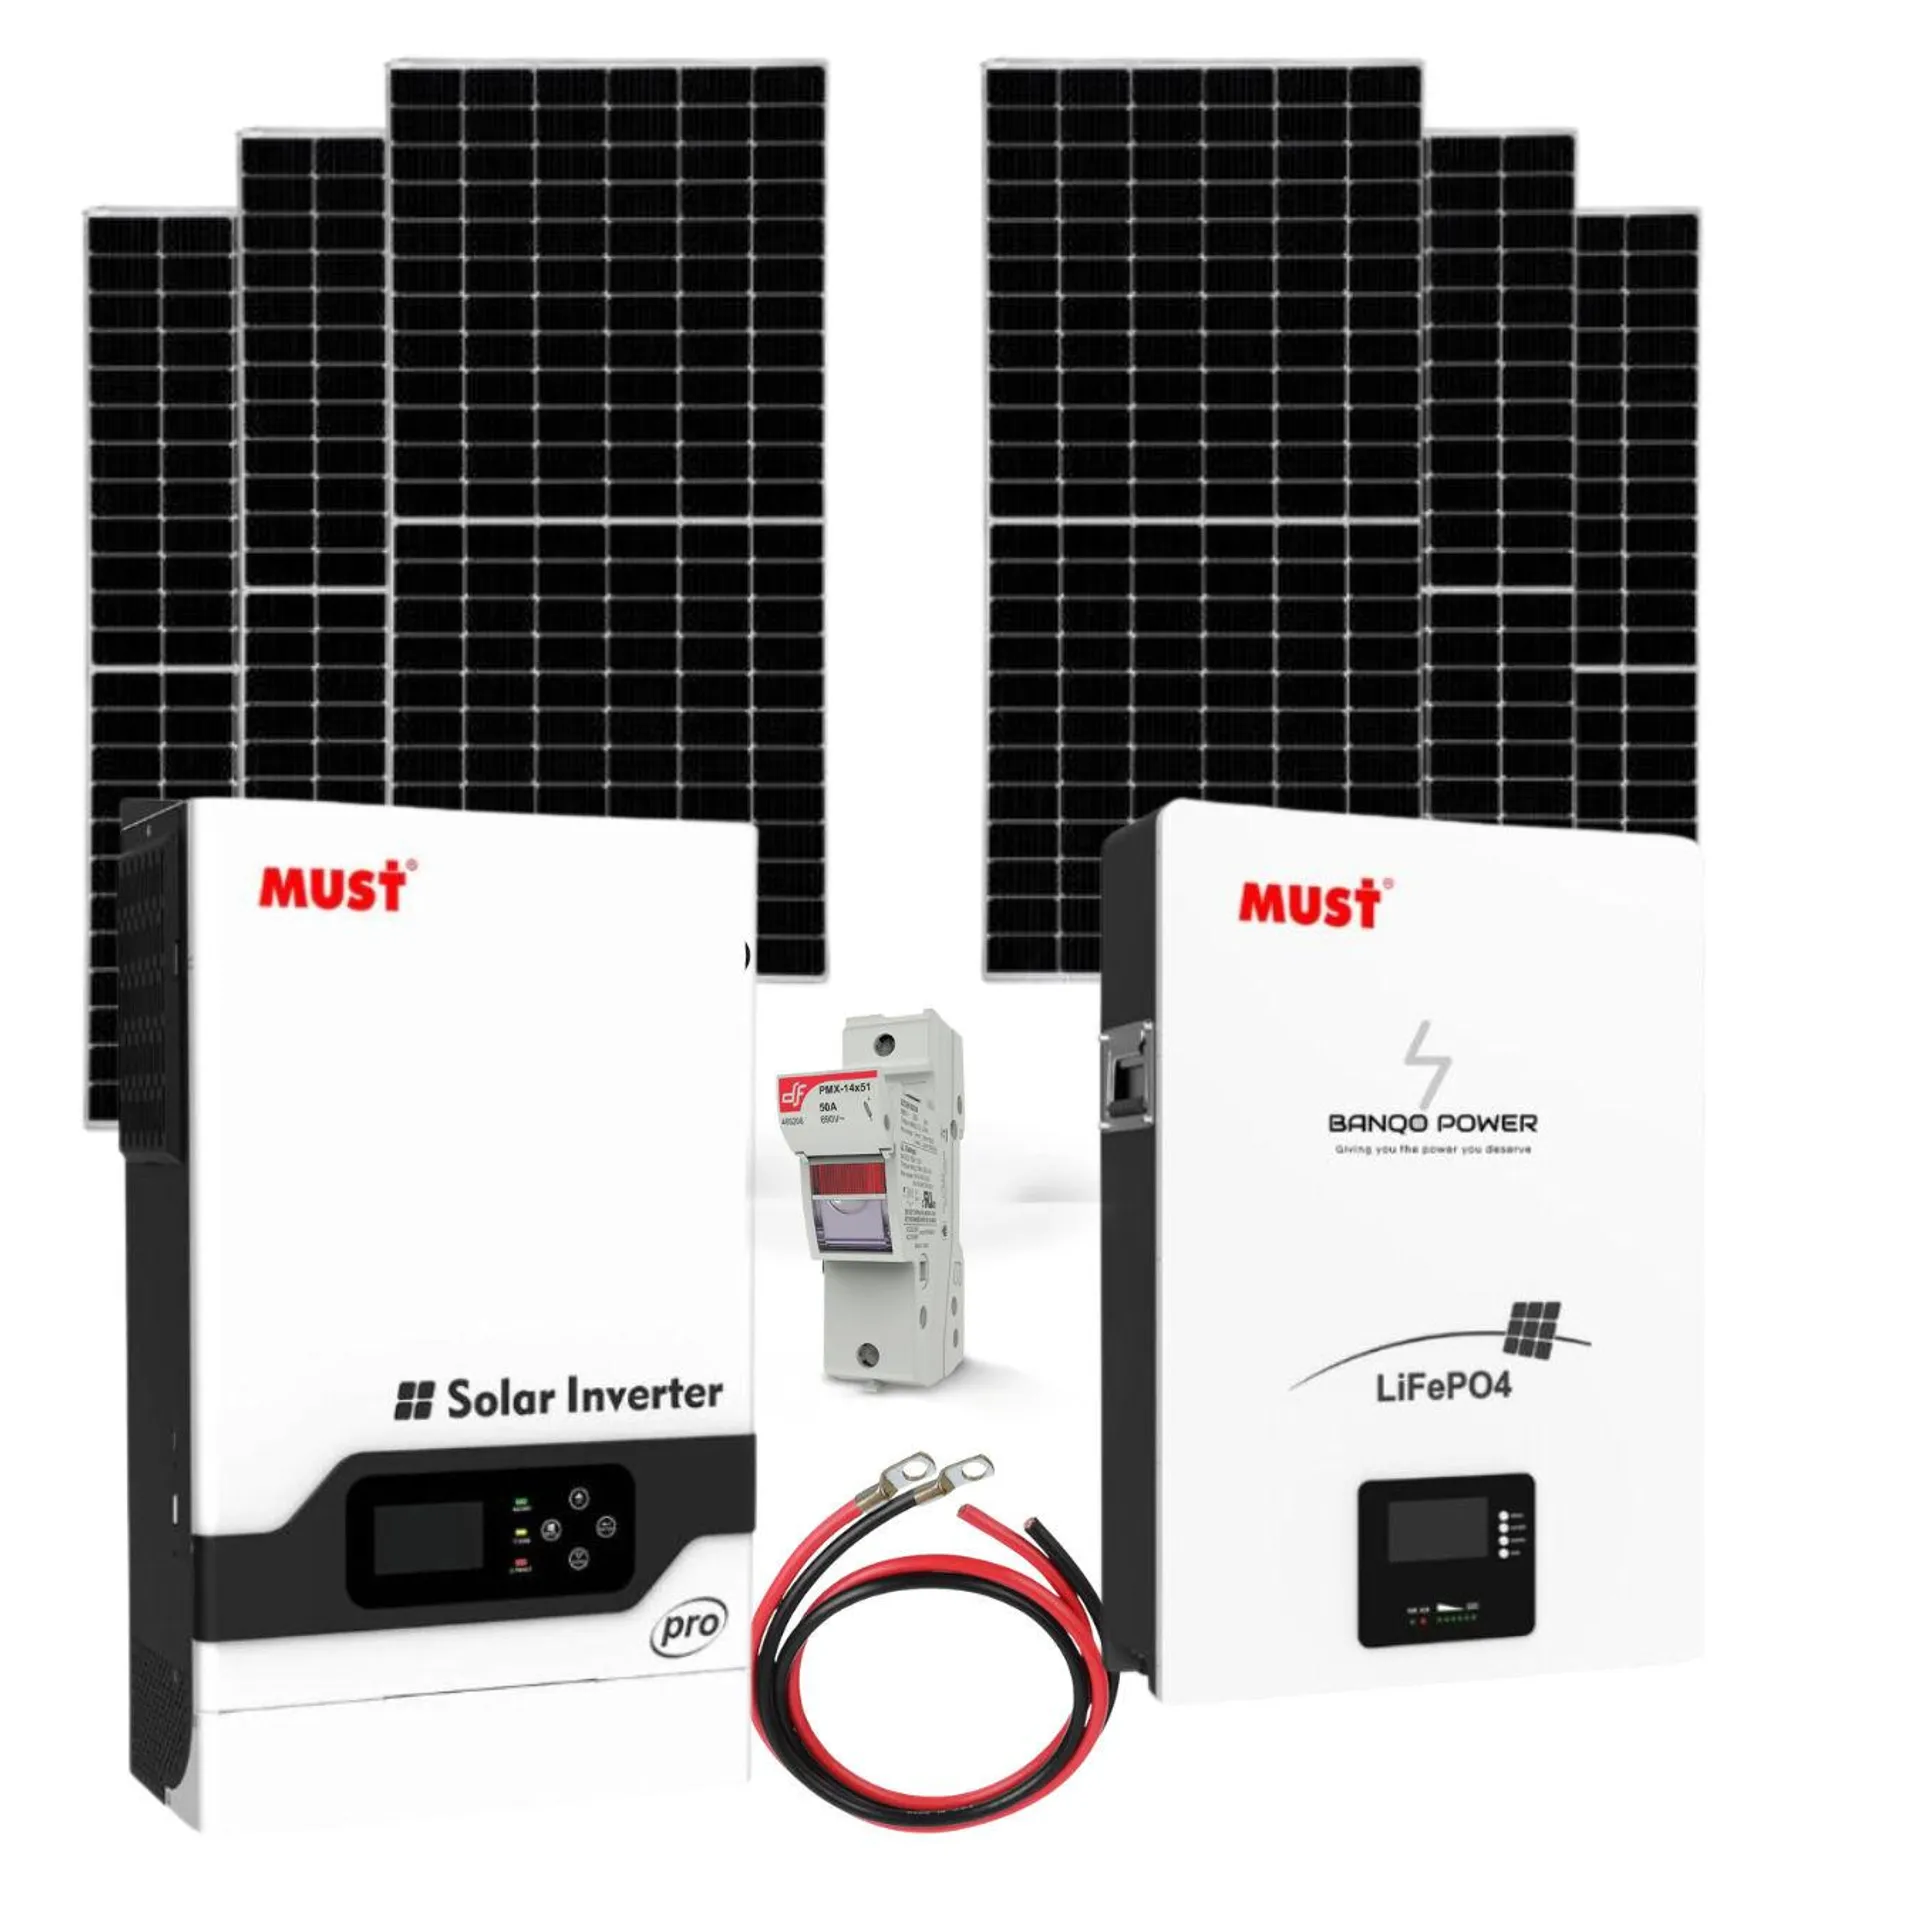 5.2kW Must Inverter| 5.12kWh Must Lithium Battery | 6 x 425W Trina Solar Panels